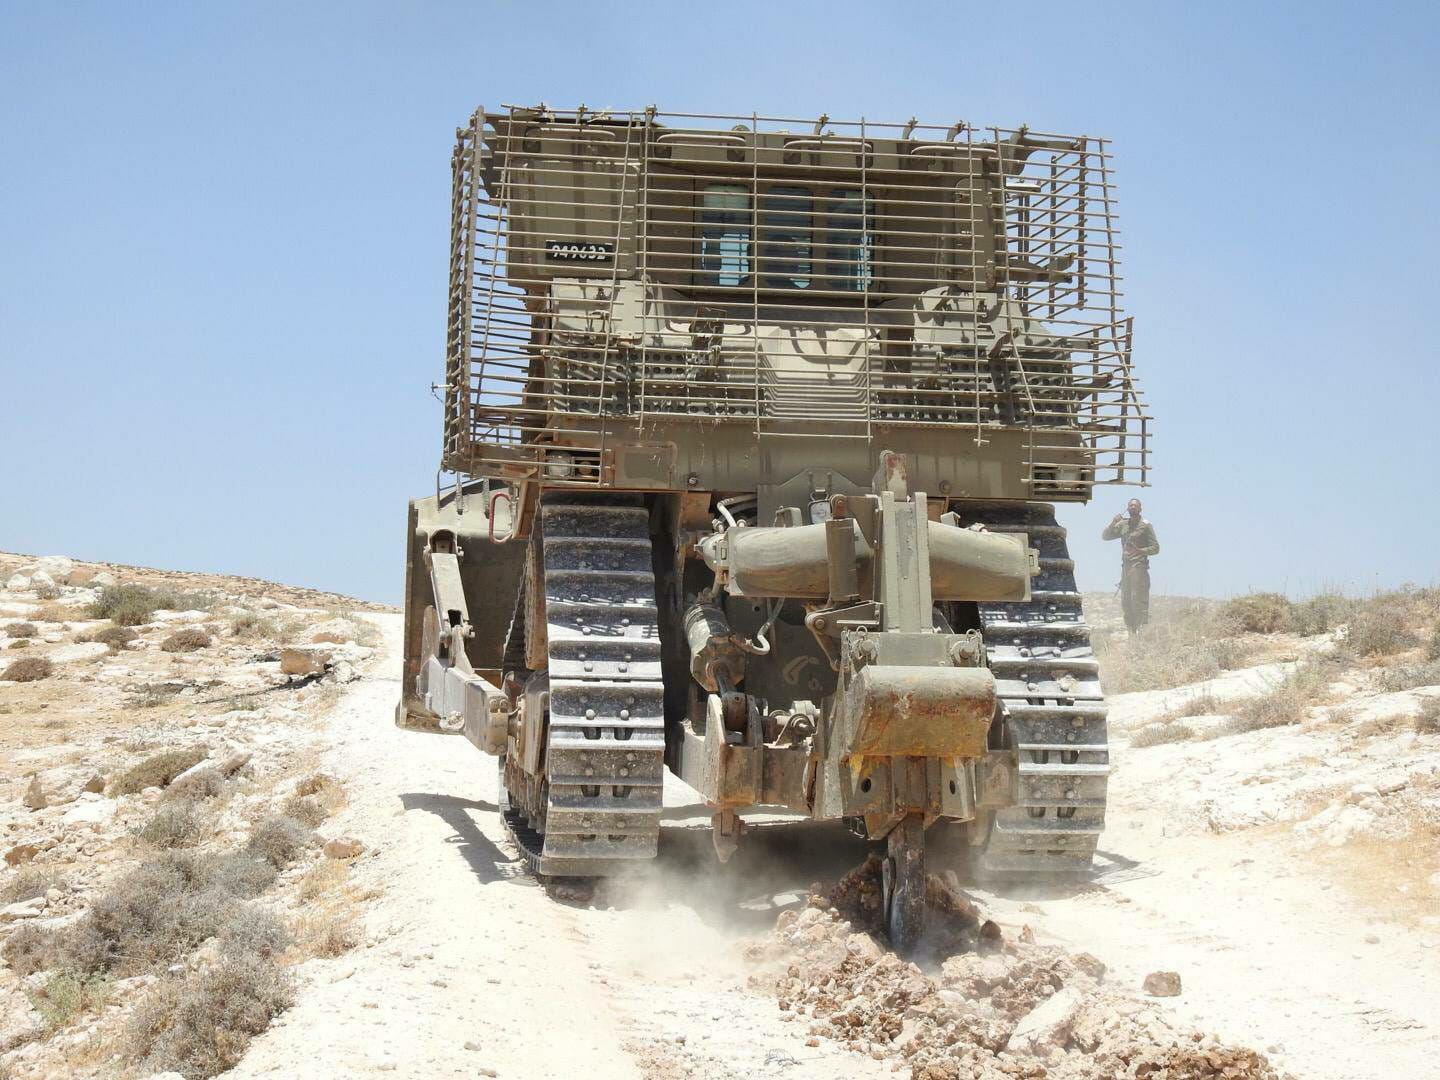 An earth moving vehicle demolishing a road as part of a forced displacement in the West Bank